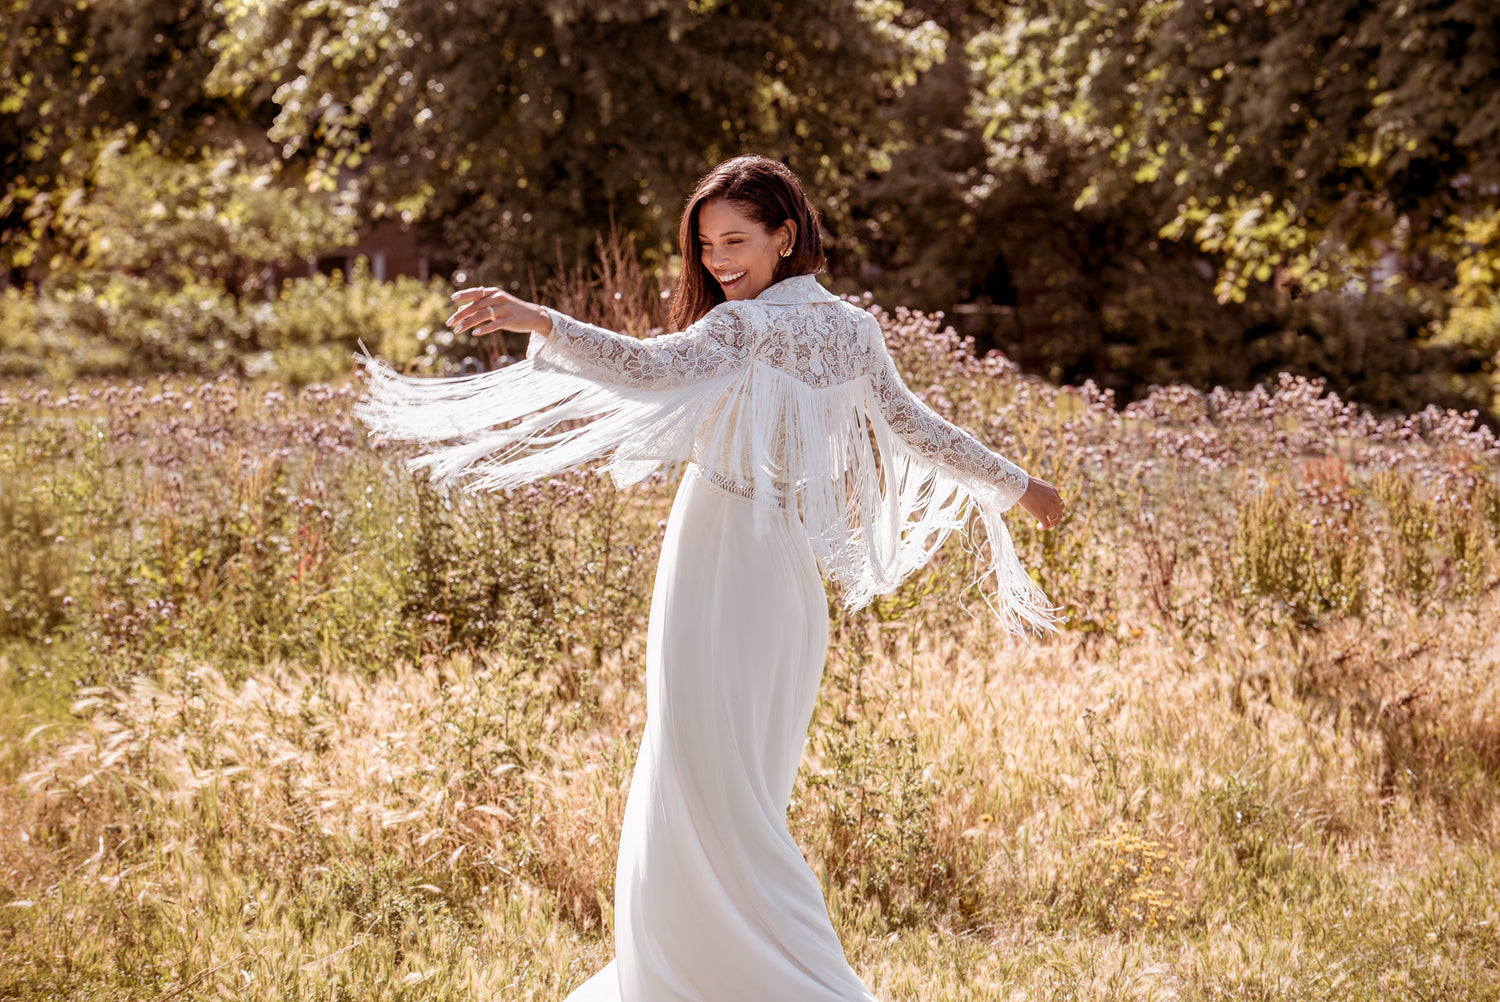 A woman with dark brown hair is in the middle of a meadow. The woman is wearing the white Raine fringe jacket and a long bridal skirt. Her arms are in the air and the fringe of the jacket is flowing underneath her arms